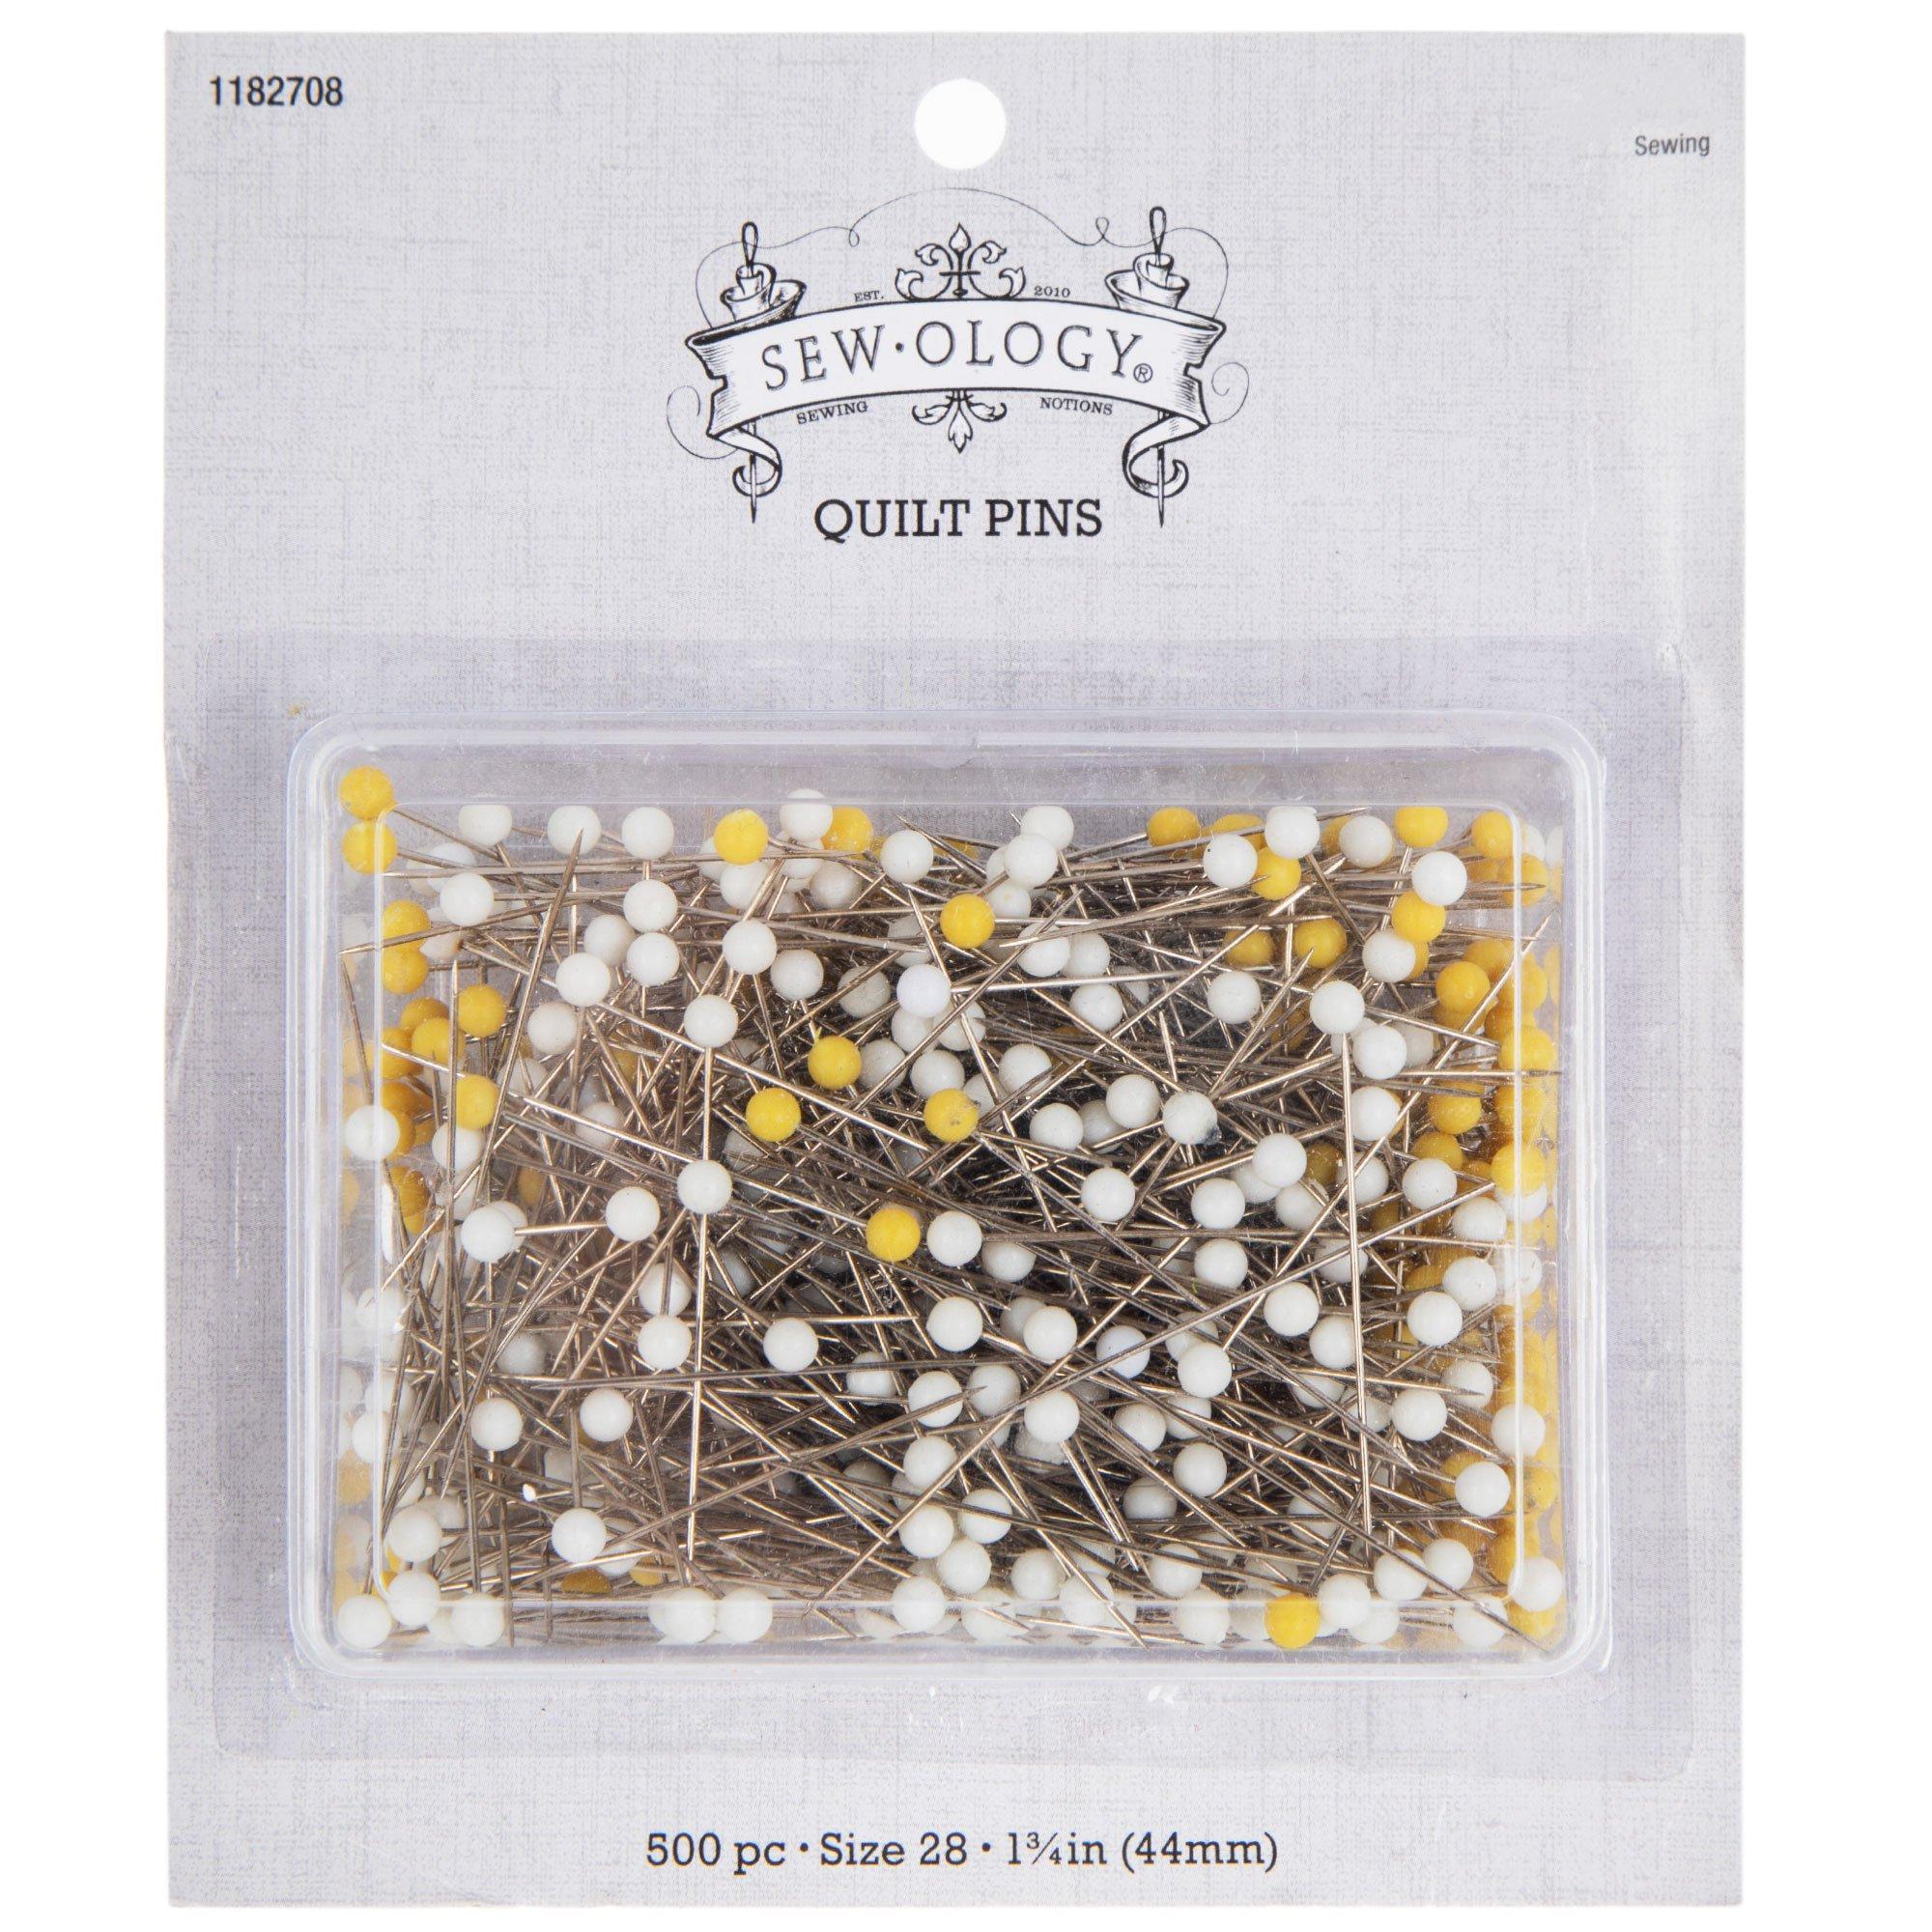 Quilting Pins - Size 28, Hobby Lobby